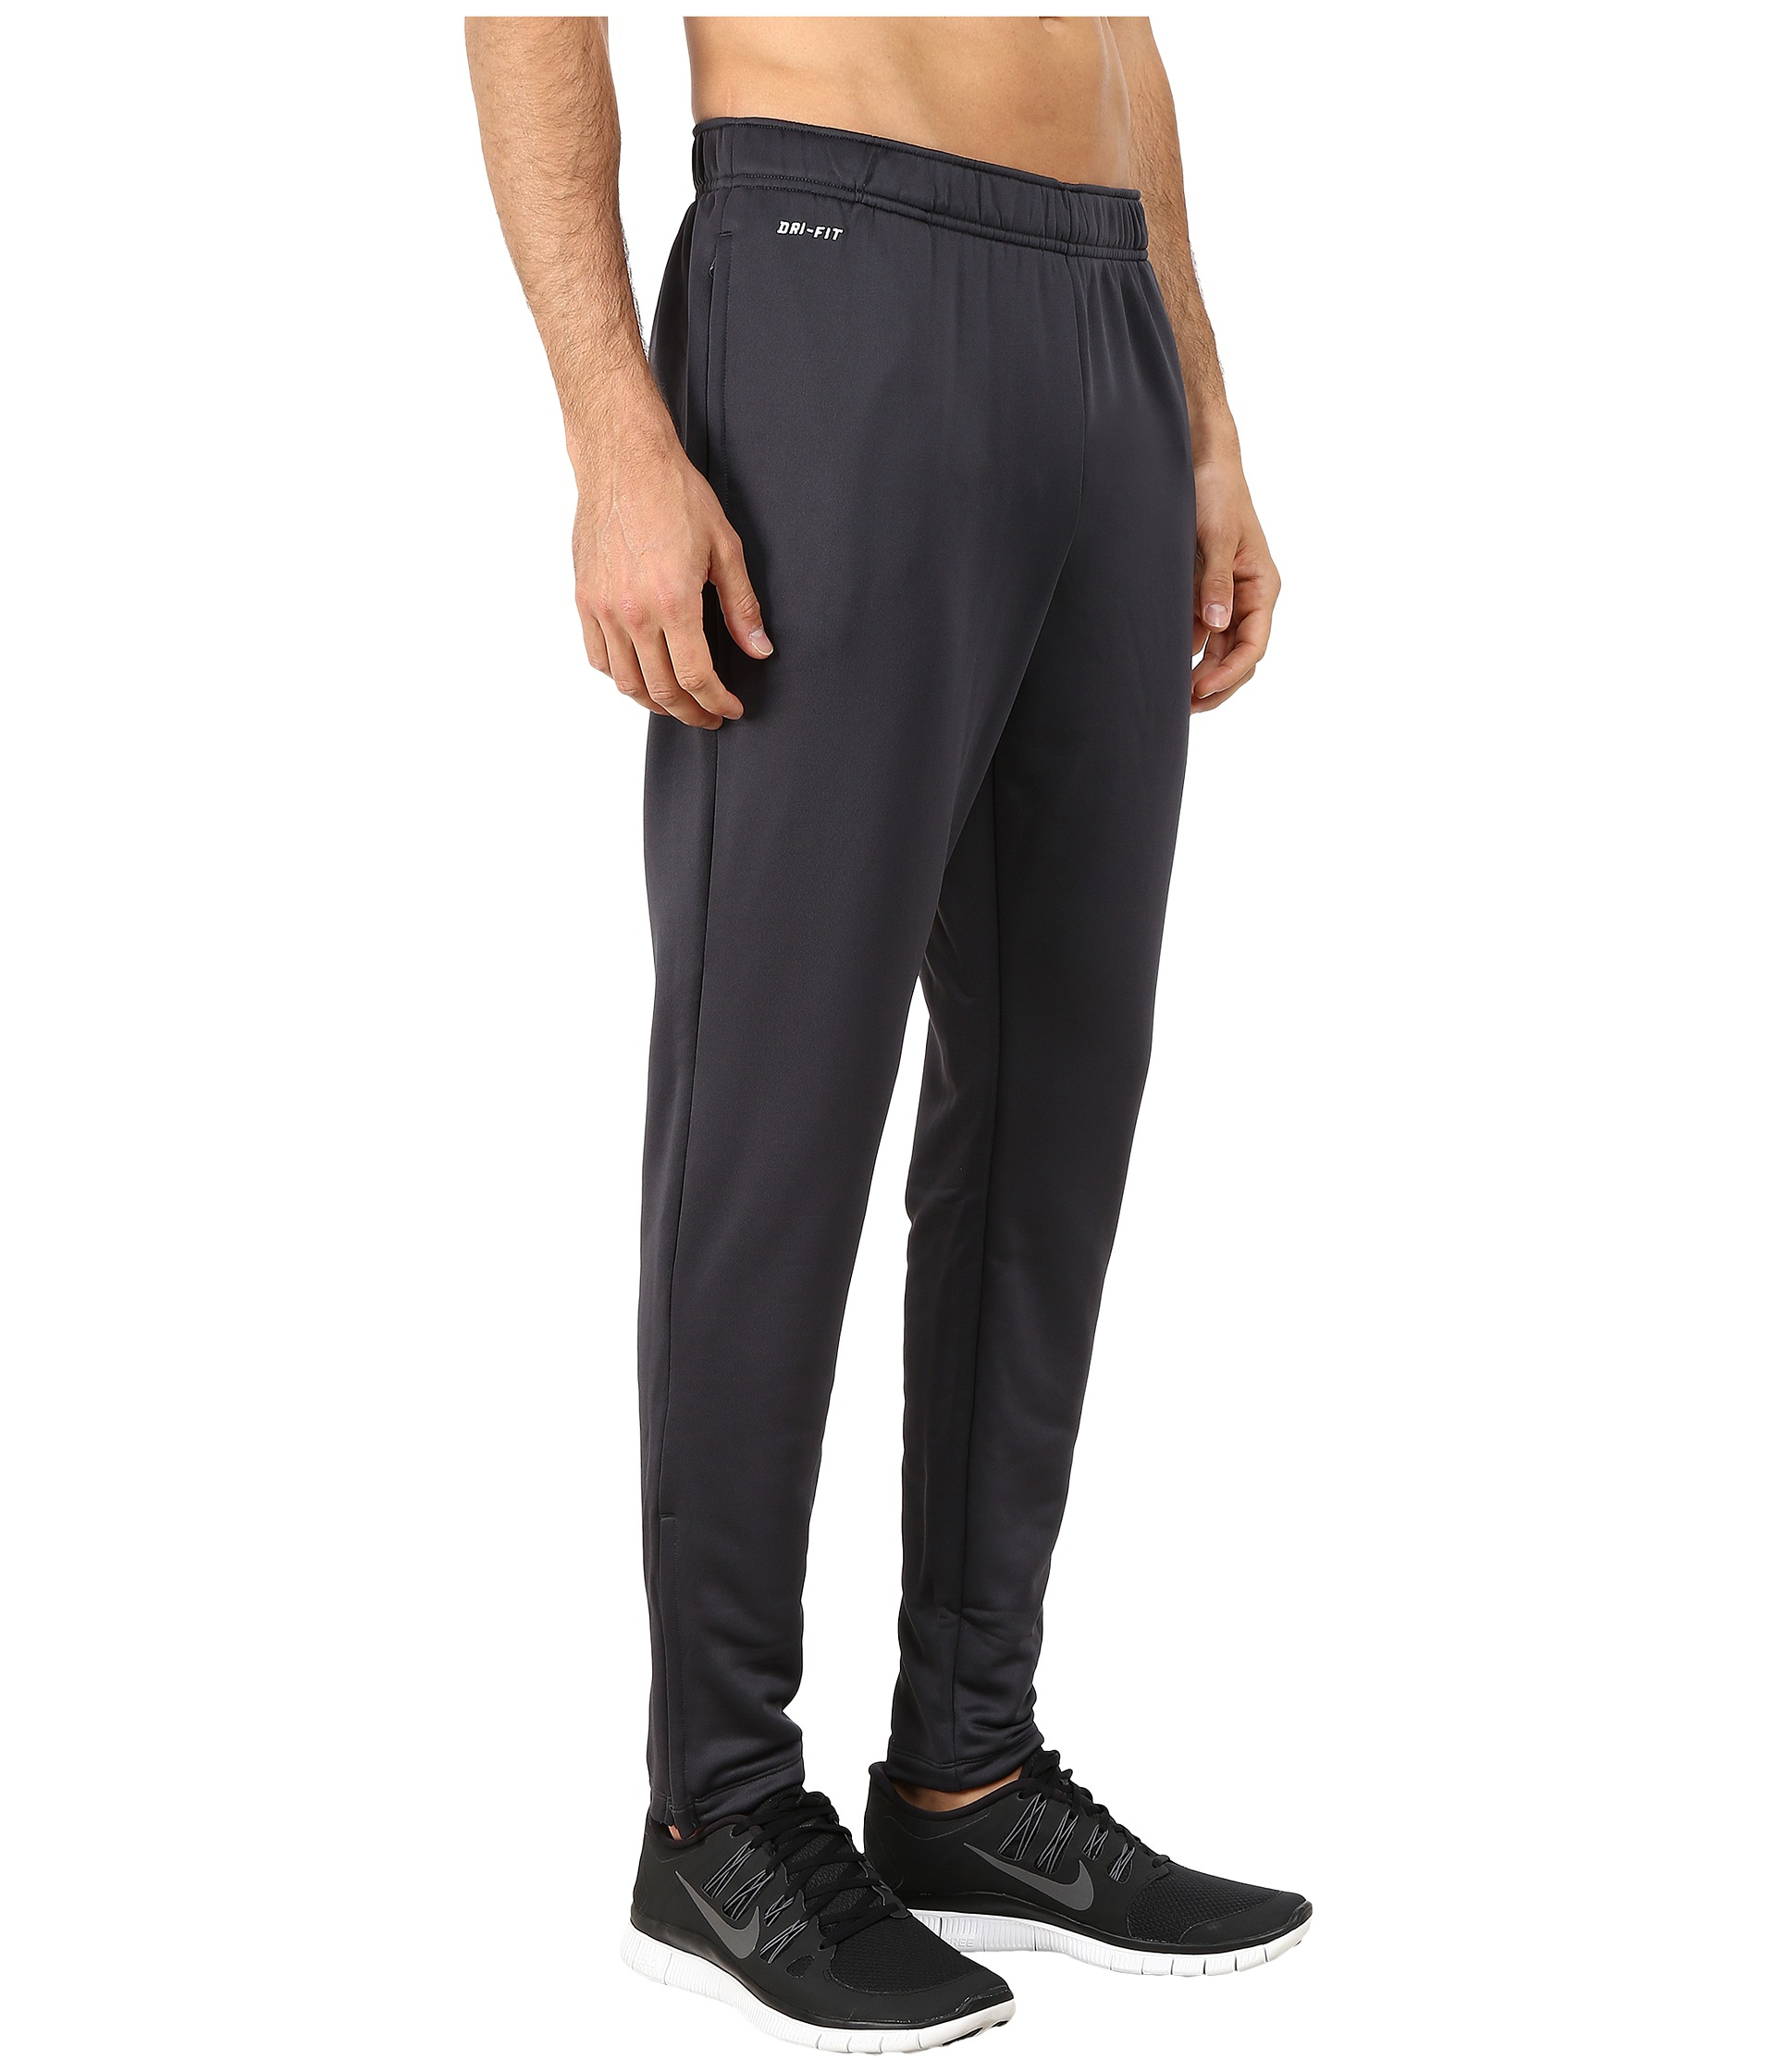 Lyst - Nike Academy Tech Pant in Gray for Men